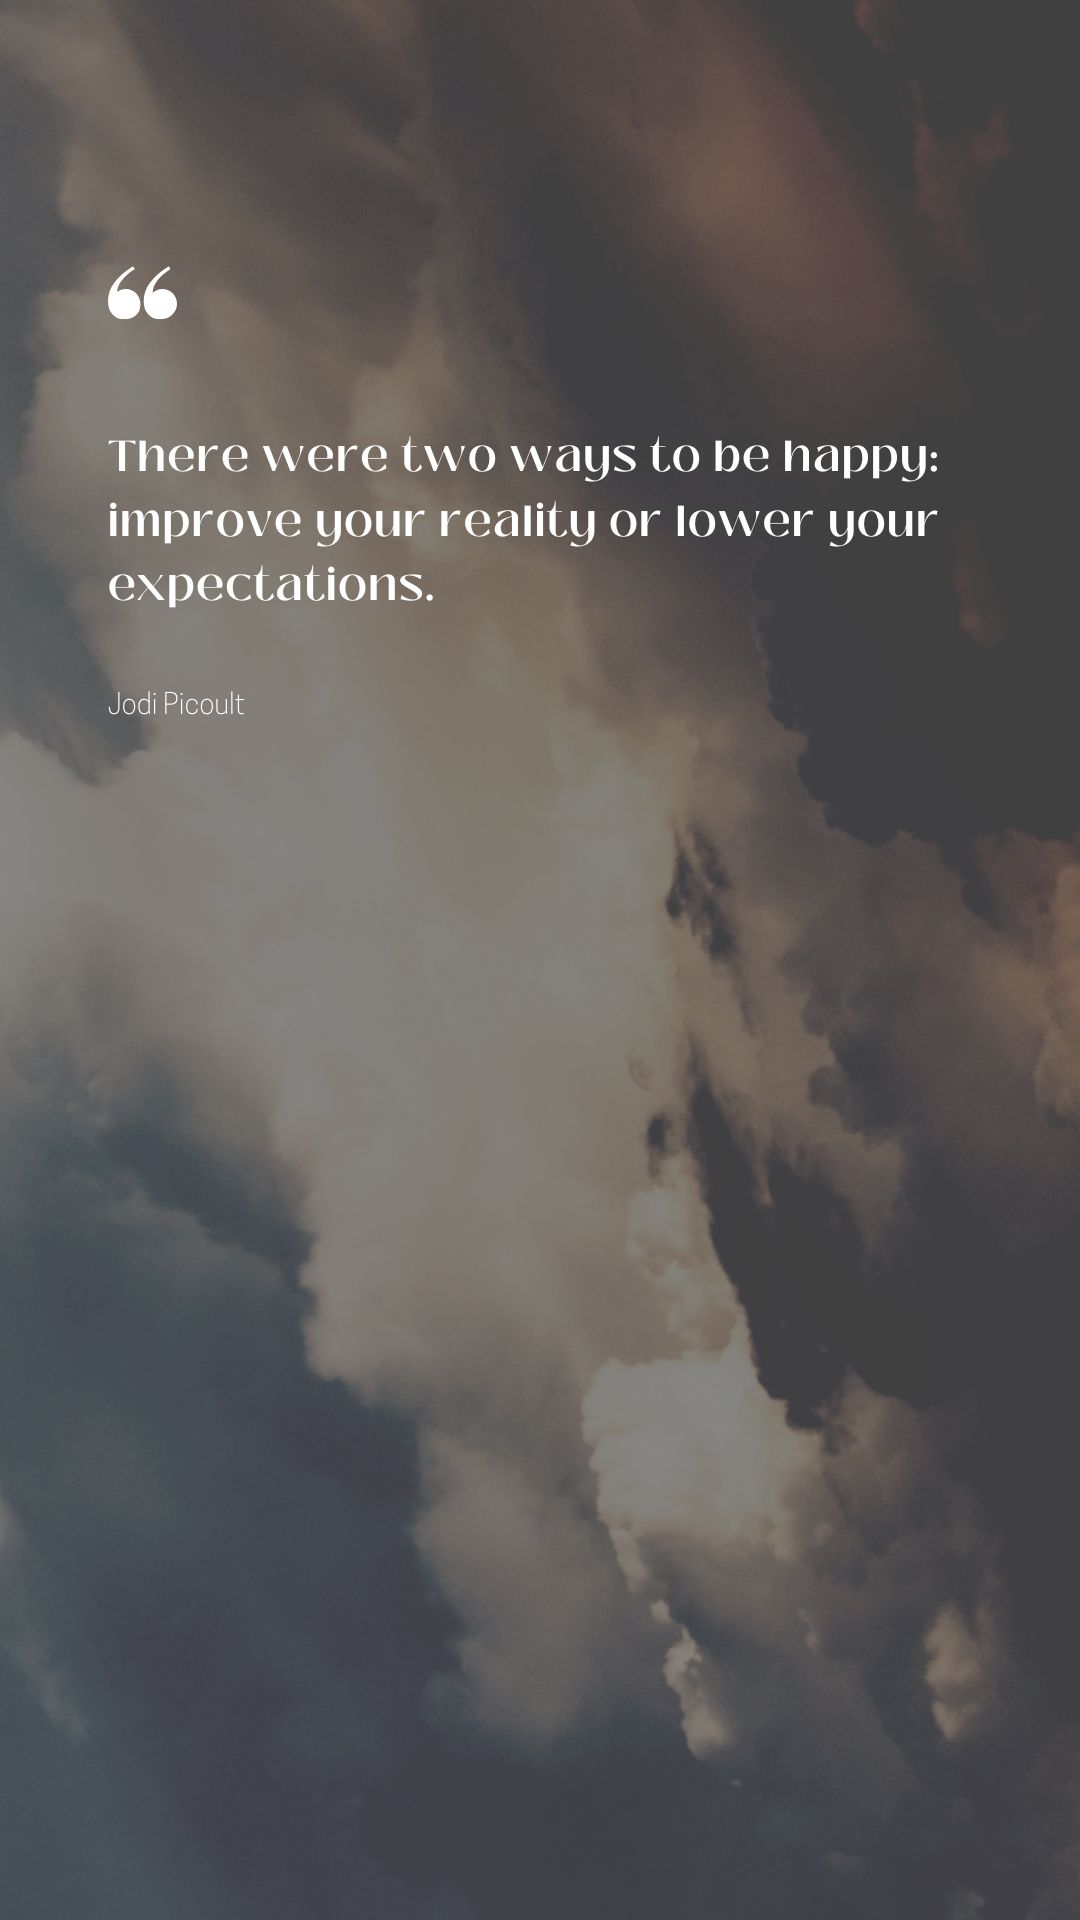 Realistic expectations quotes ways happy improve reality Jodi Picoult